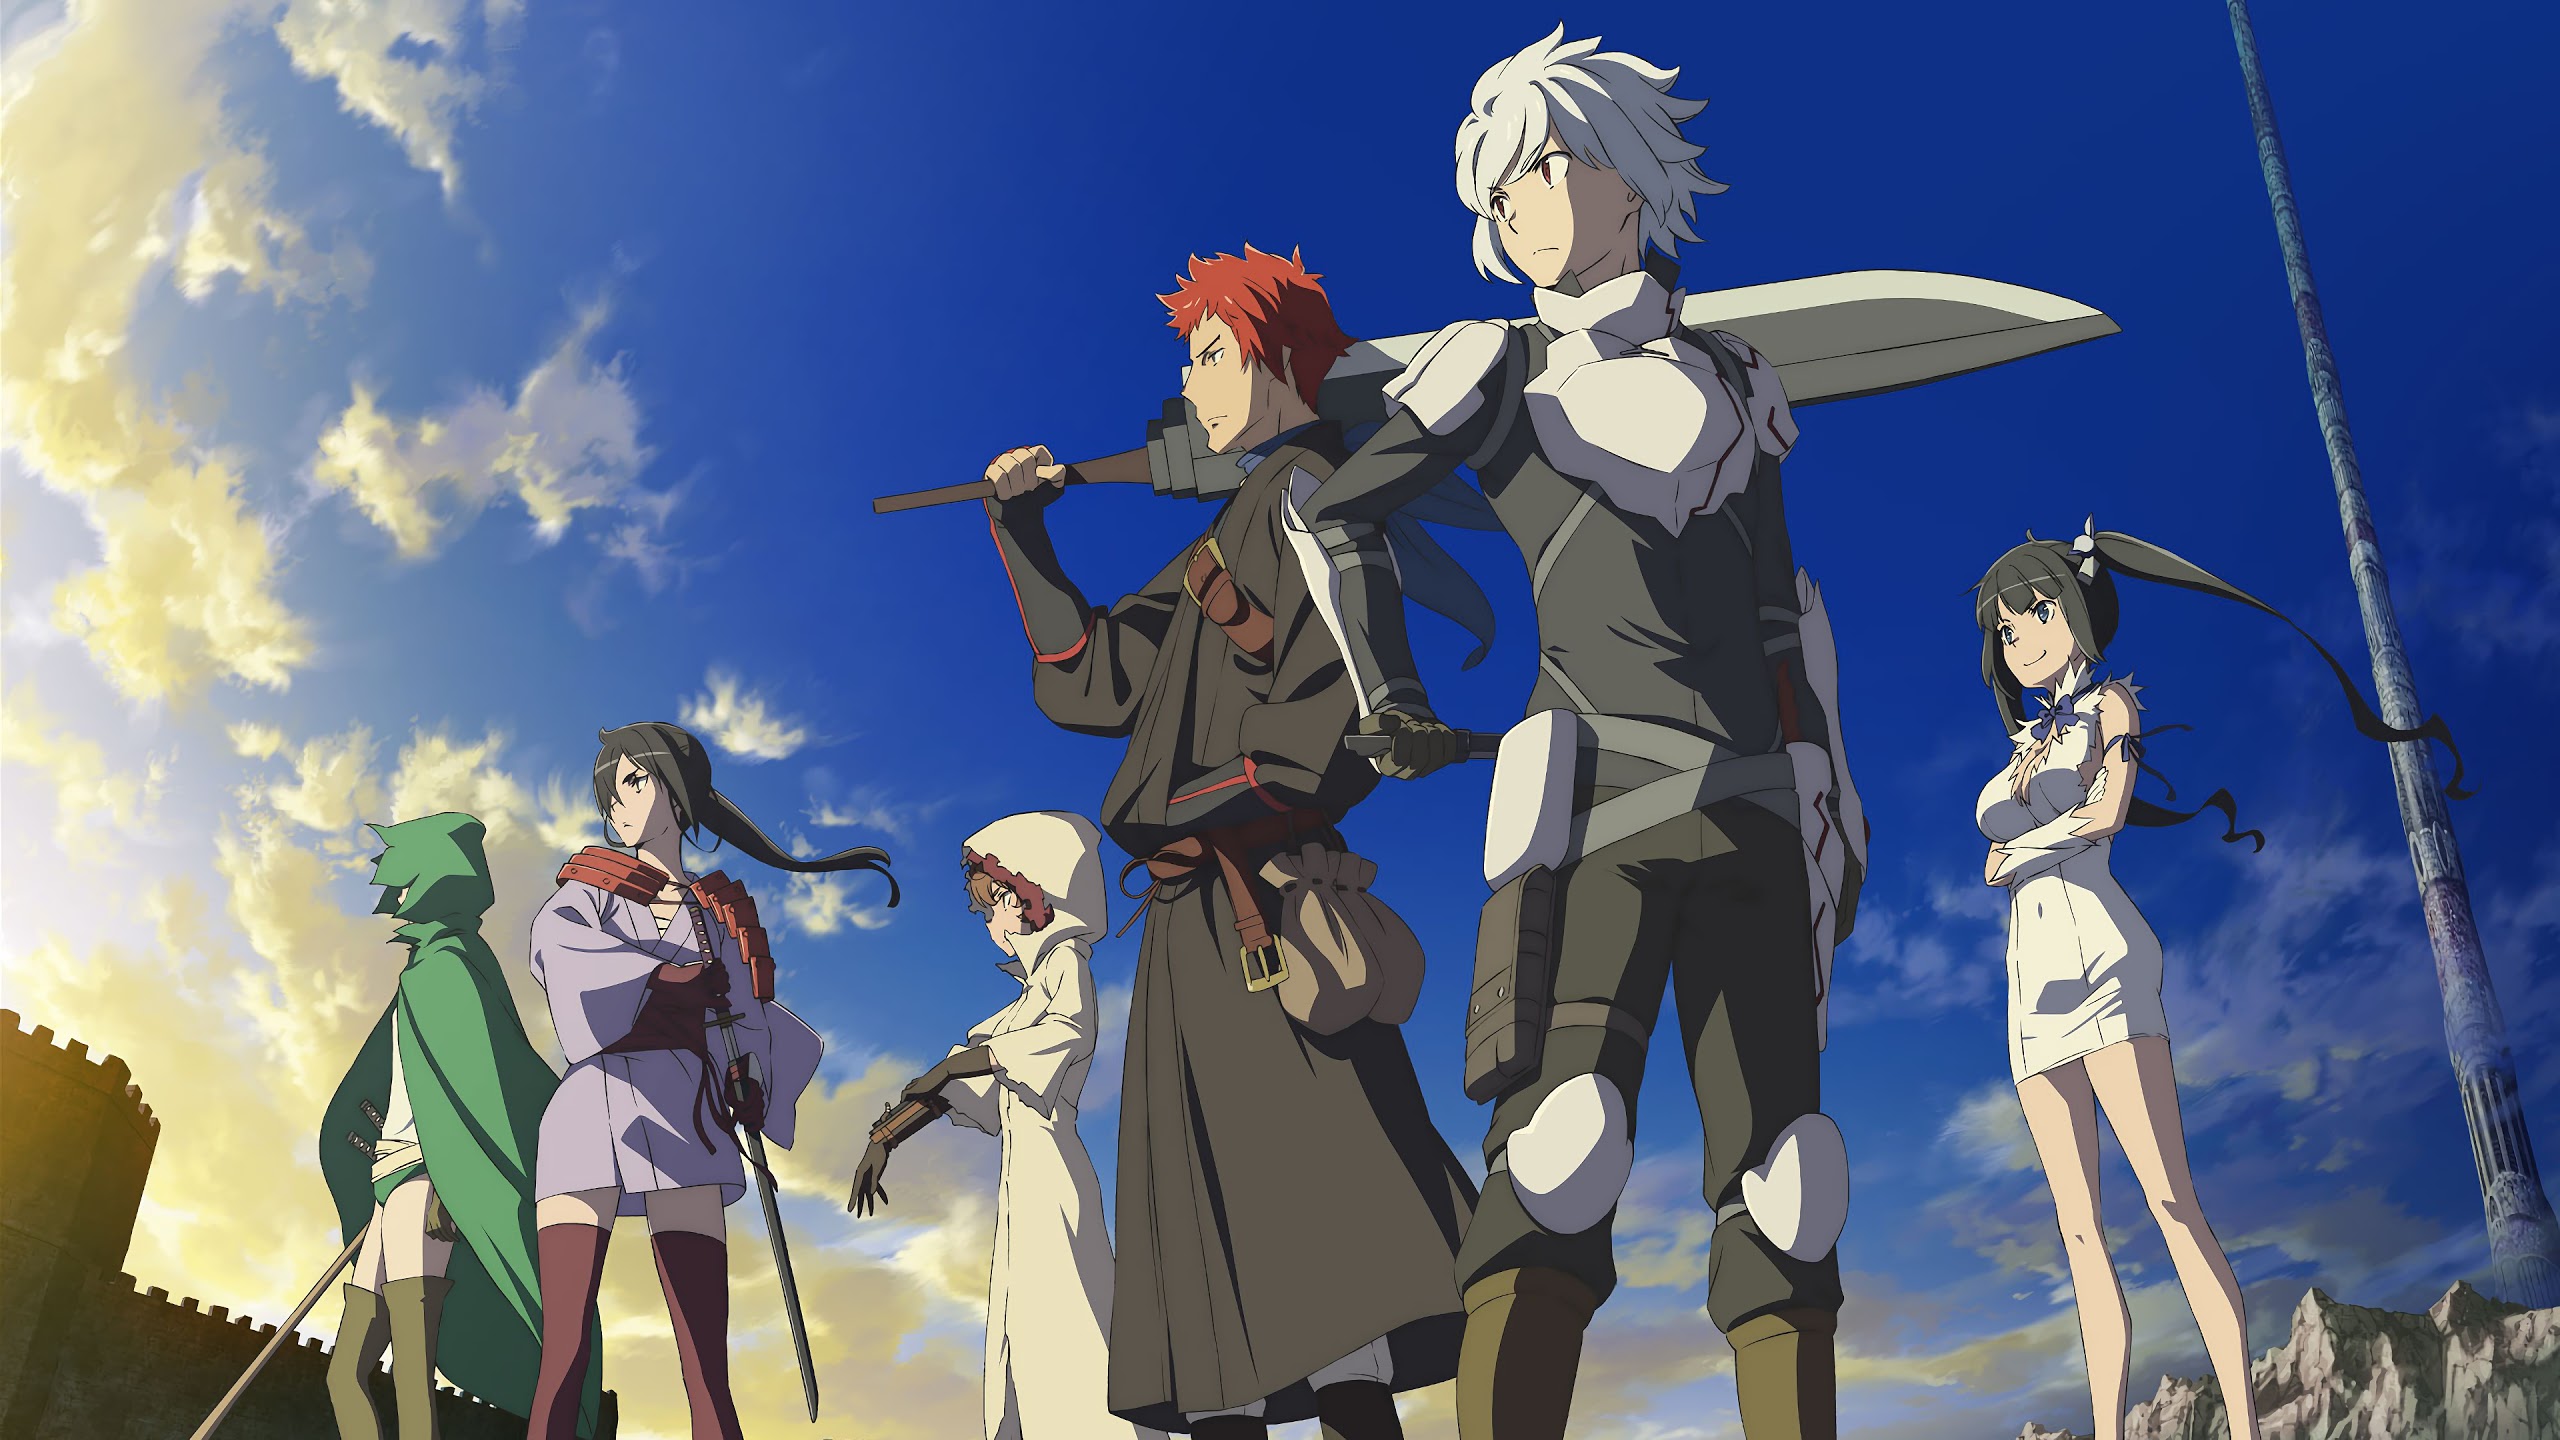 Danmachi Season 3 Episode 10: Release Date, Preview, Cast and Others!